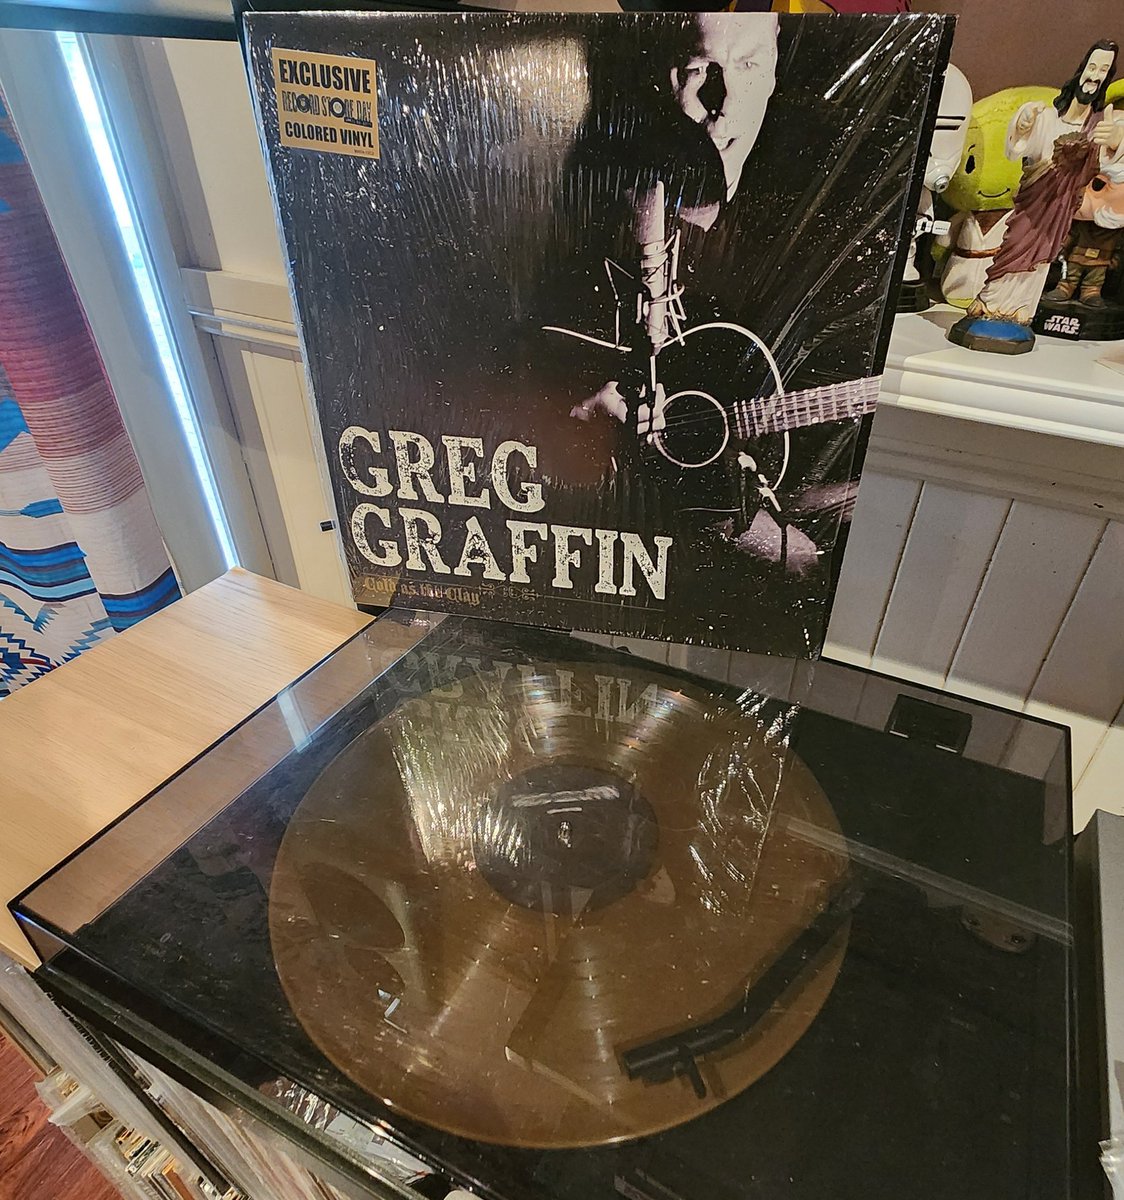 Greg Graffin - Cold As The Clay (2006)

#TwitterVinylClub #WhatsOnYourTurntable #nowplaying #nowspinning #inthishousethaticallhome #thatmuchfurtherwest #suburbancaveman #vinylrecords #recordcollector #GregGraffin #BadReligion